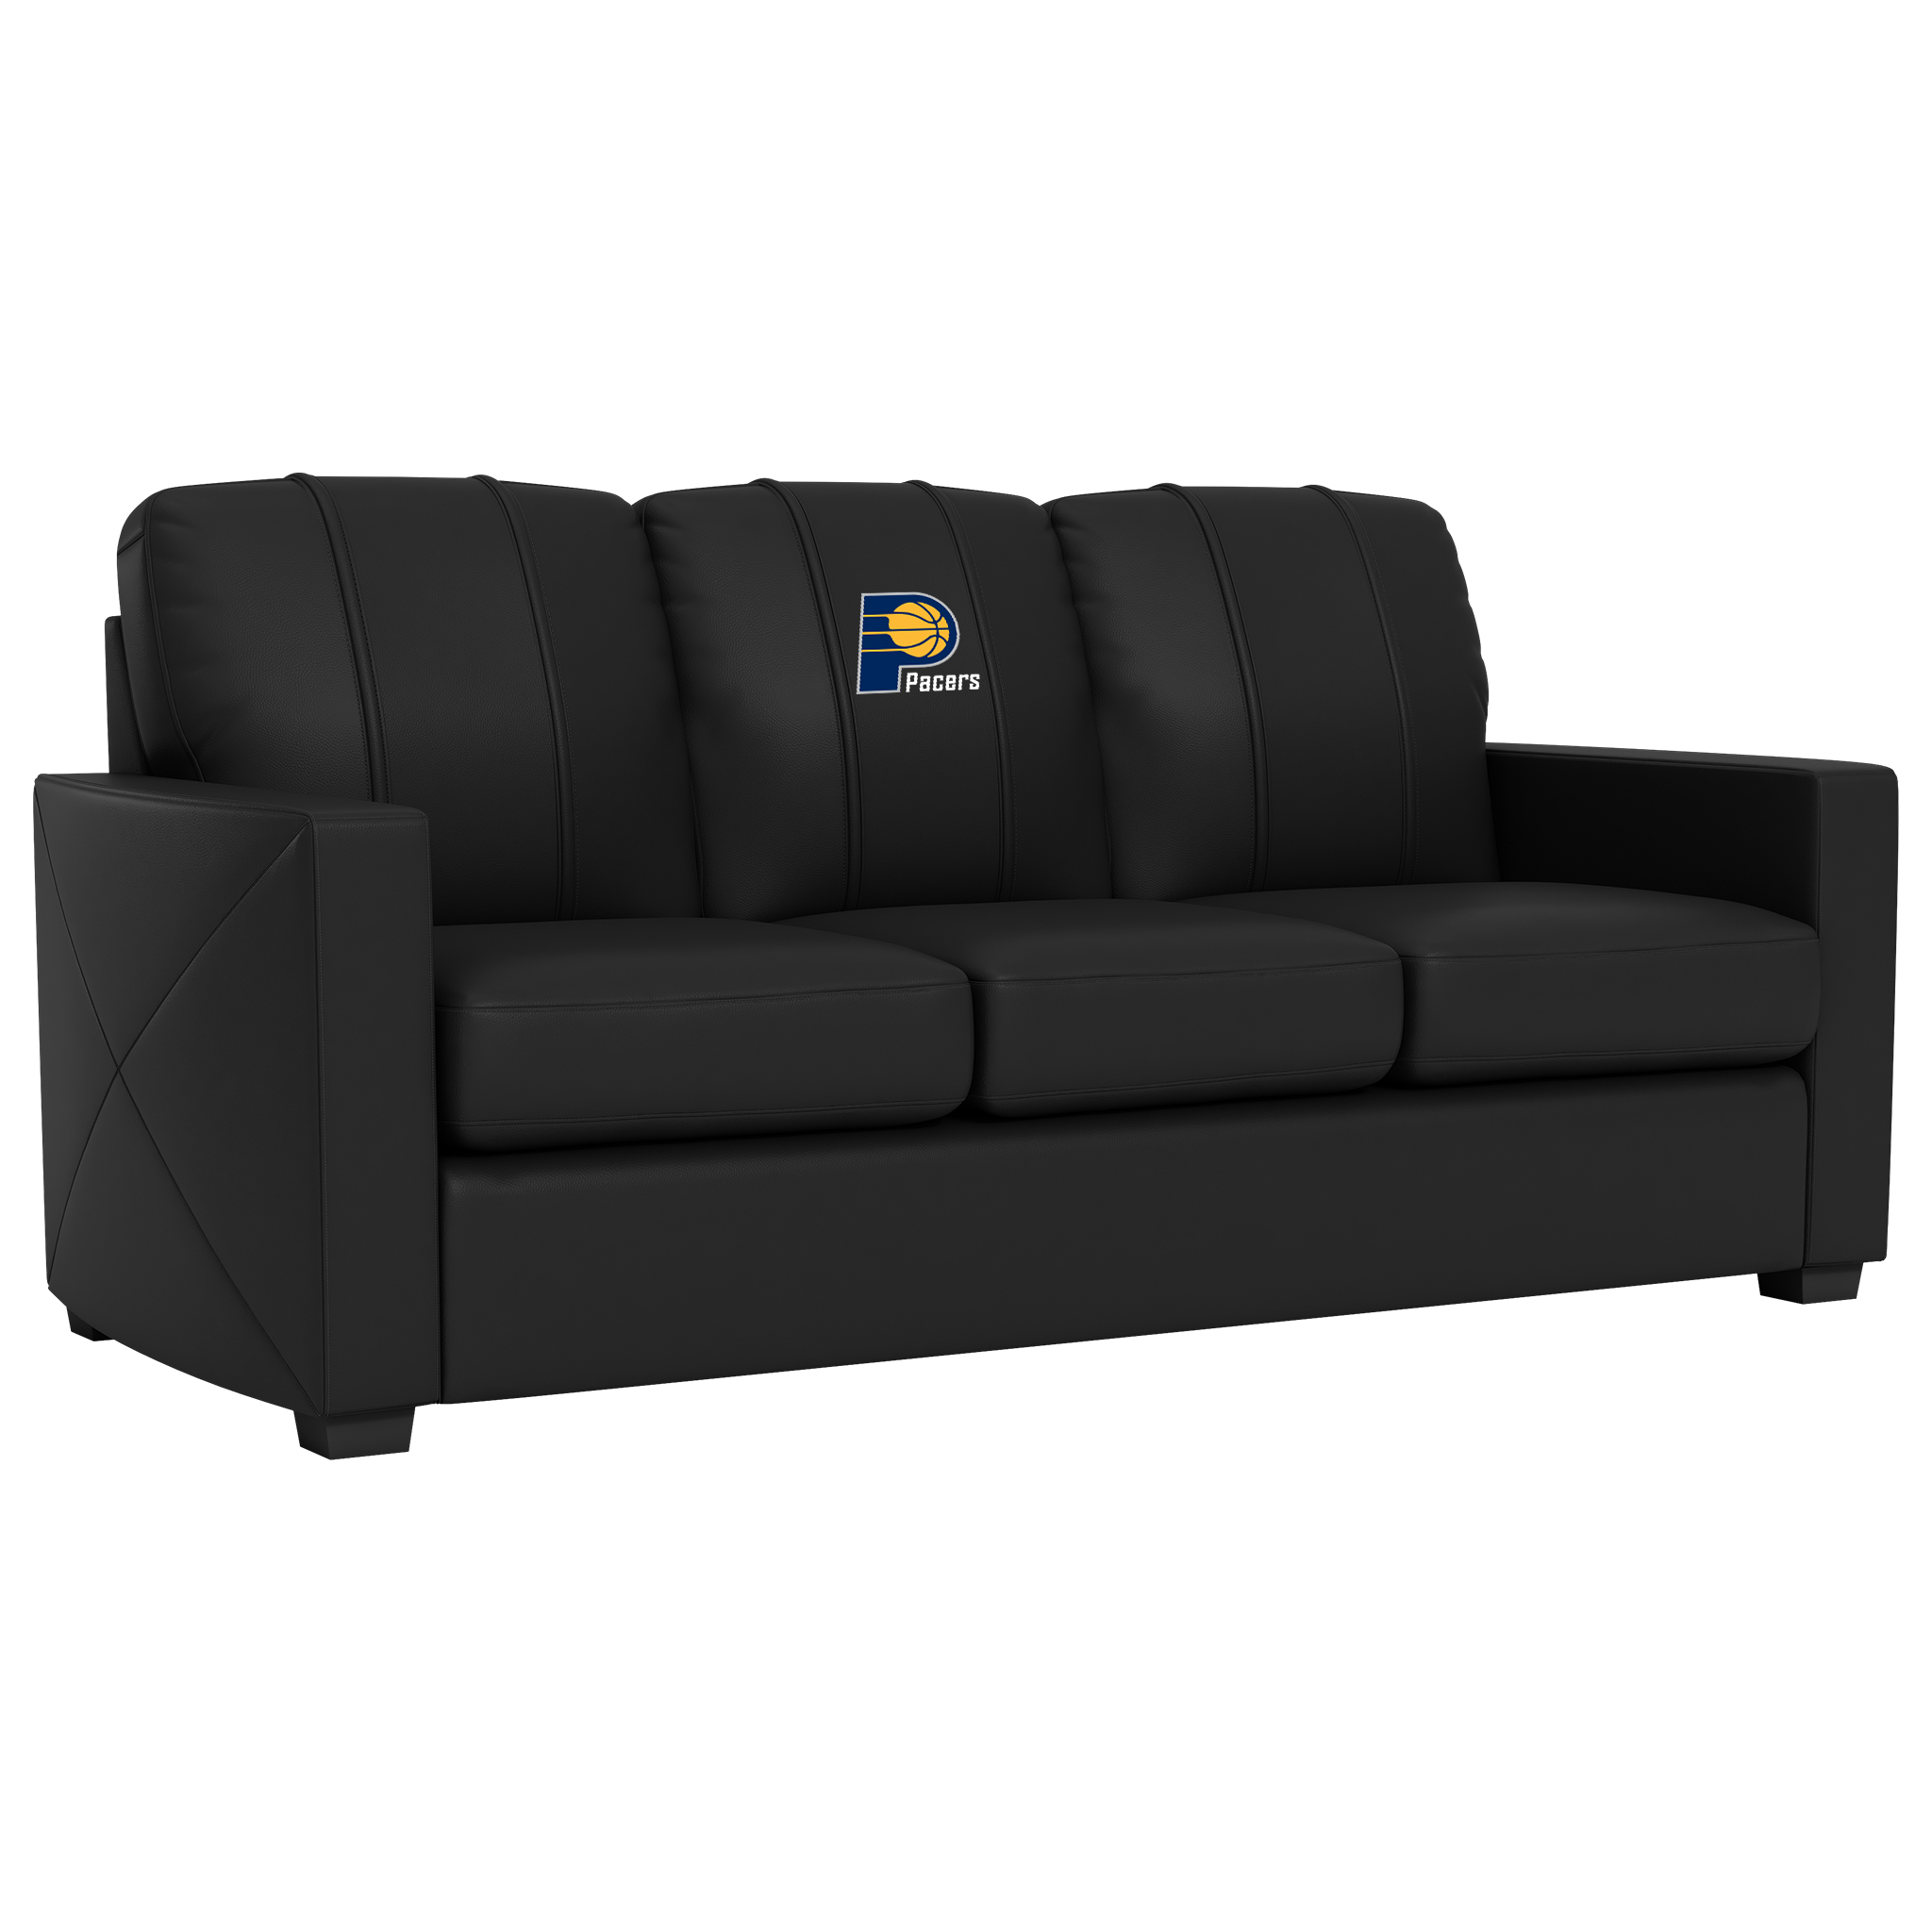 Indiana Pacers Silver Sofa Indiana Pacers Logo